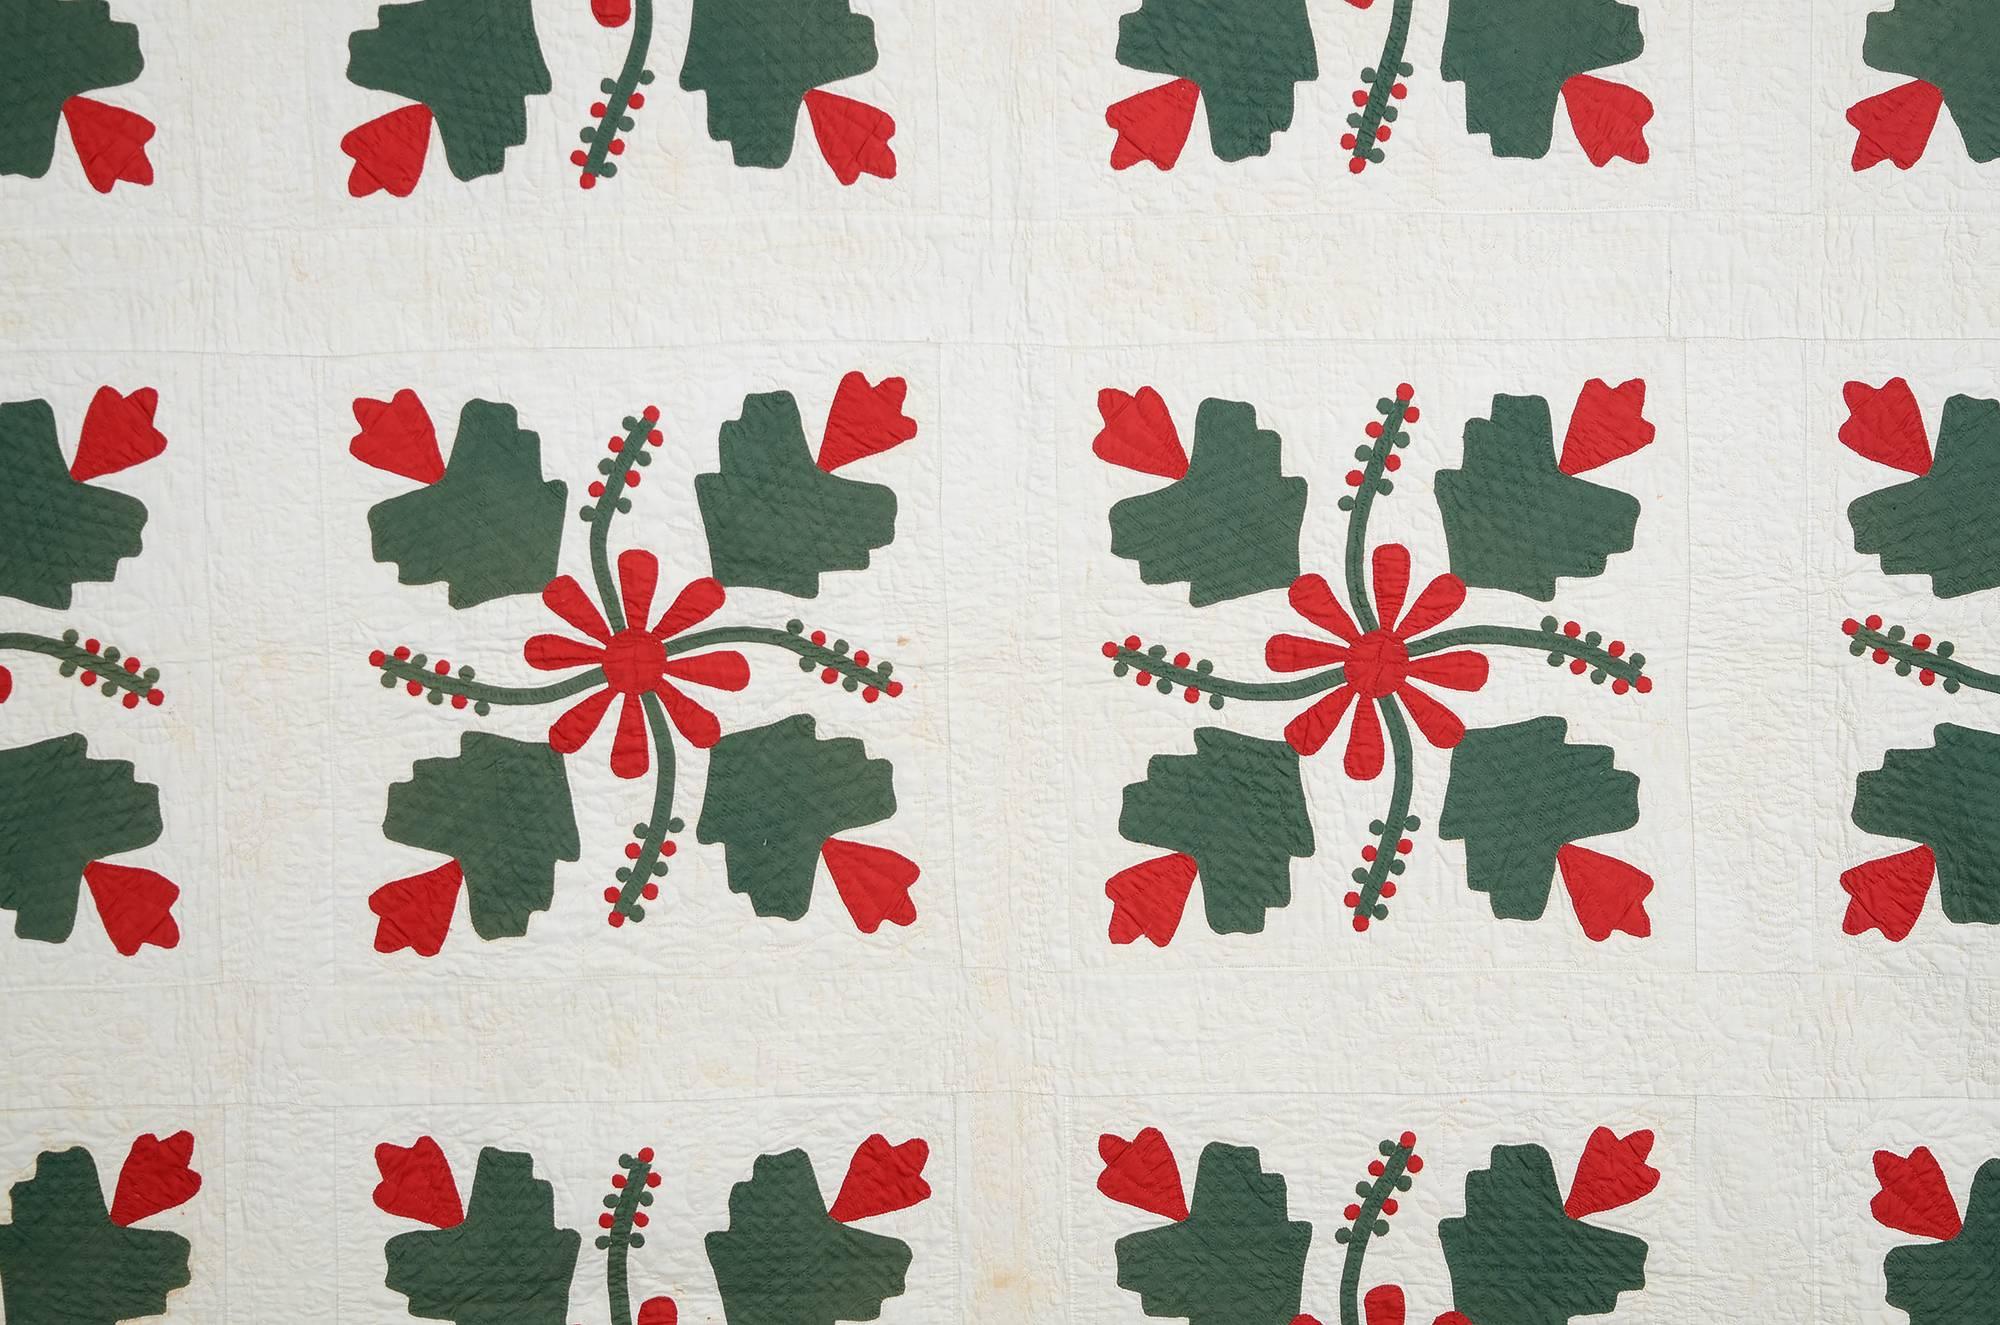 This Cockscomb and Currants (aka grapes and oak leaf) applique quilt is done with very Fine stitching. The quilting depicts patterns of ferns and a variety of leaves. The applique border beautifully repeats the arms of the primary blocks to create a